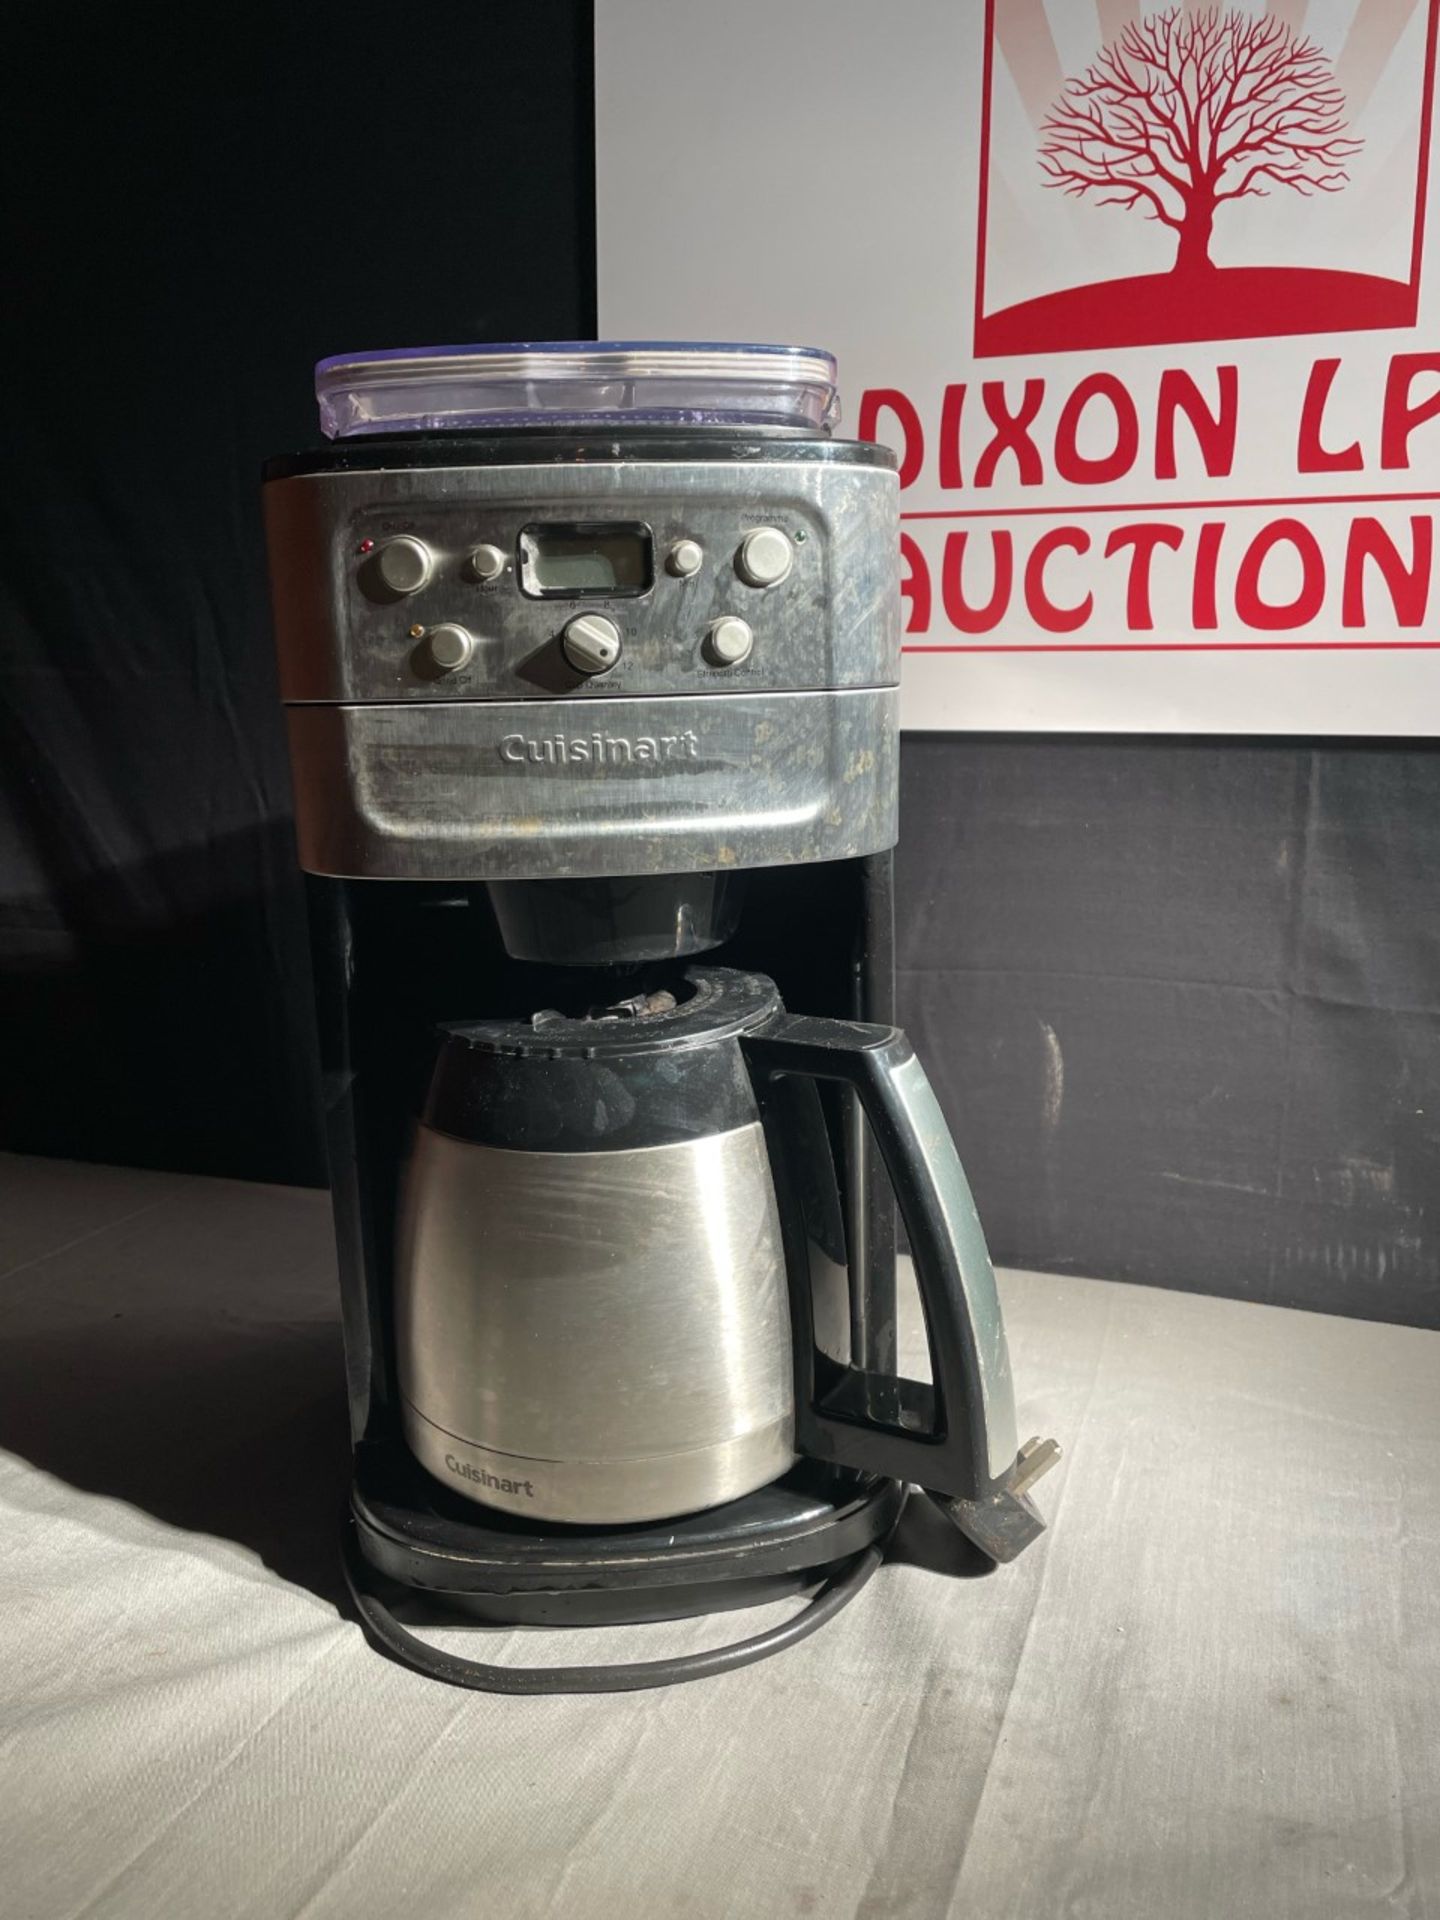 Cuisinart grind and brew bean to cup coffee machine. Used but good condition